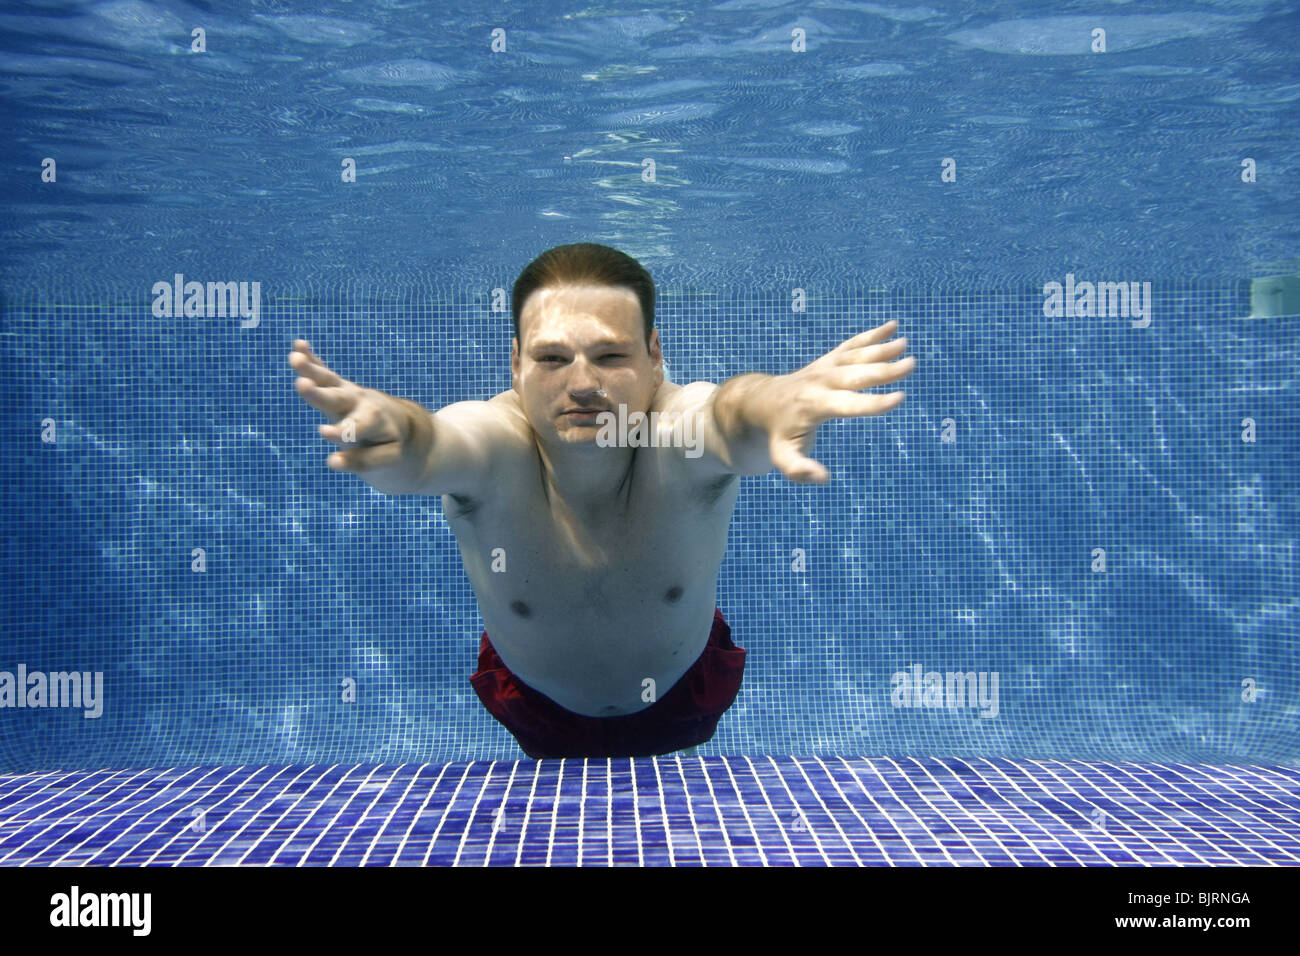 Underwater picture of a youg man swimming. Stock Photo